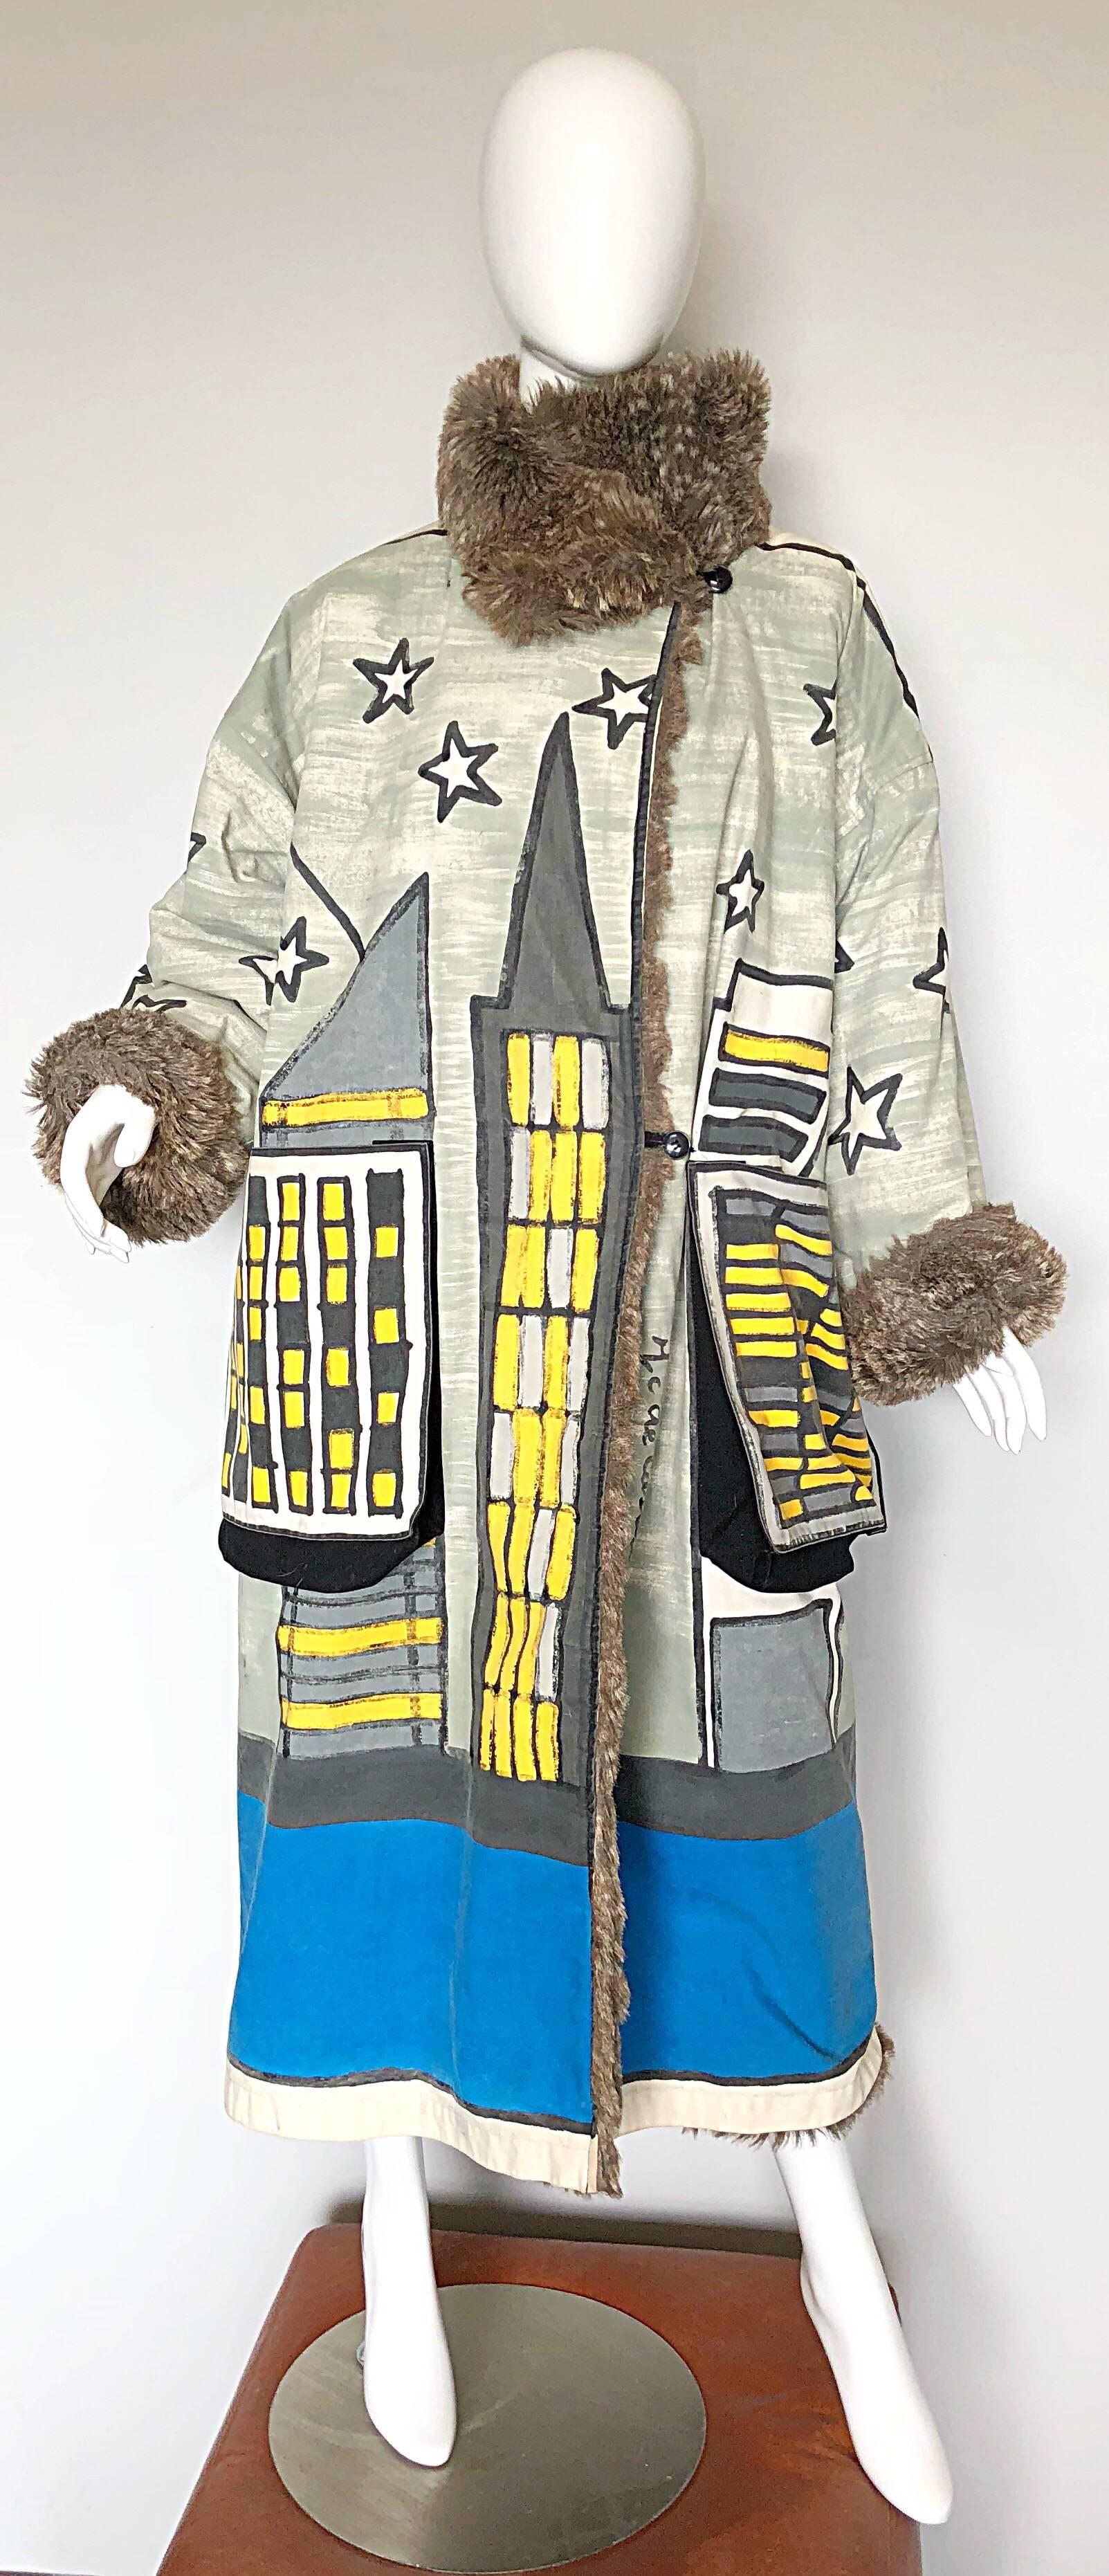 Fabulous one of a kind musuem piece vintage 
JEAN CHARLES de CASTELBAJAC hand painted oversized reversible coat! Features a painted skyline with a moon, stars and UFO. Vibrant colors of blue, yellow, grey and white. Lining is a super soft gray faux